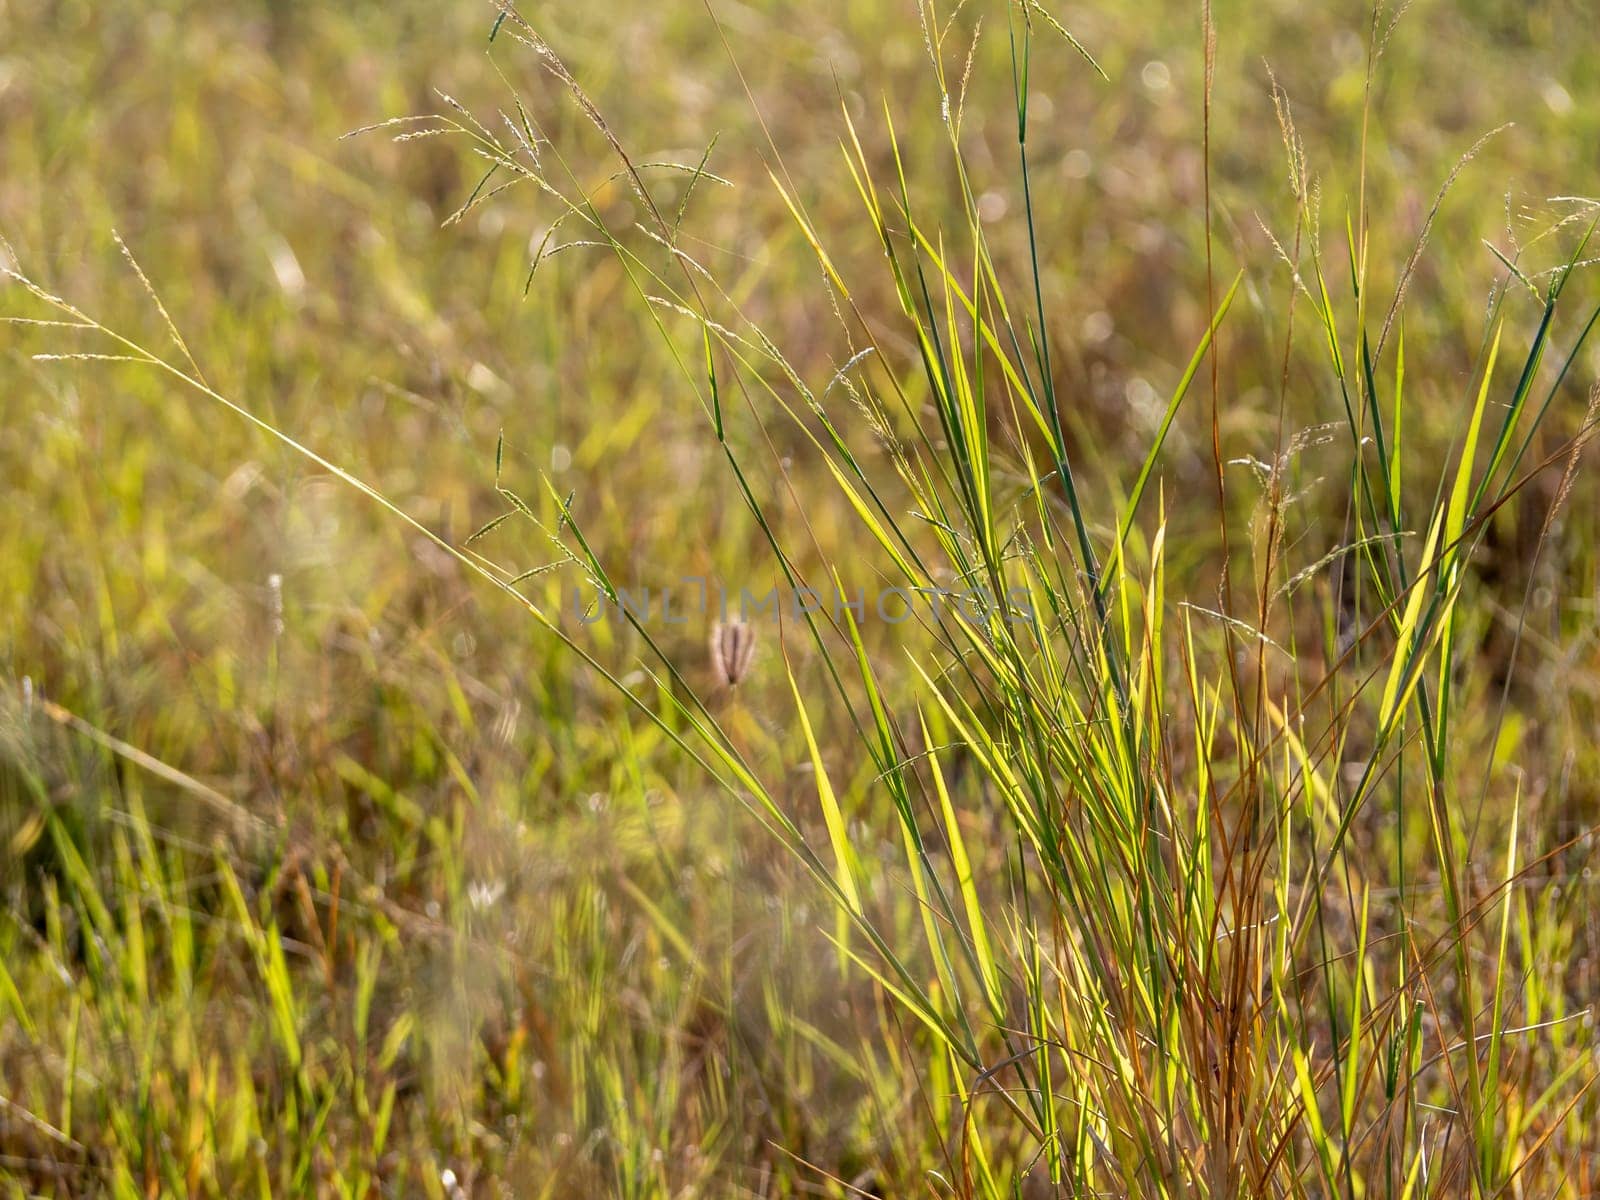 Grass flowers in the wasteland along the road by Satakorn